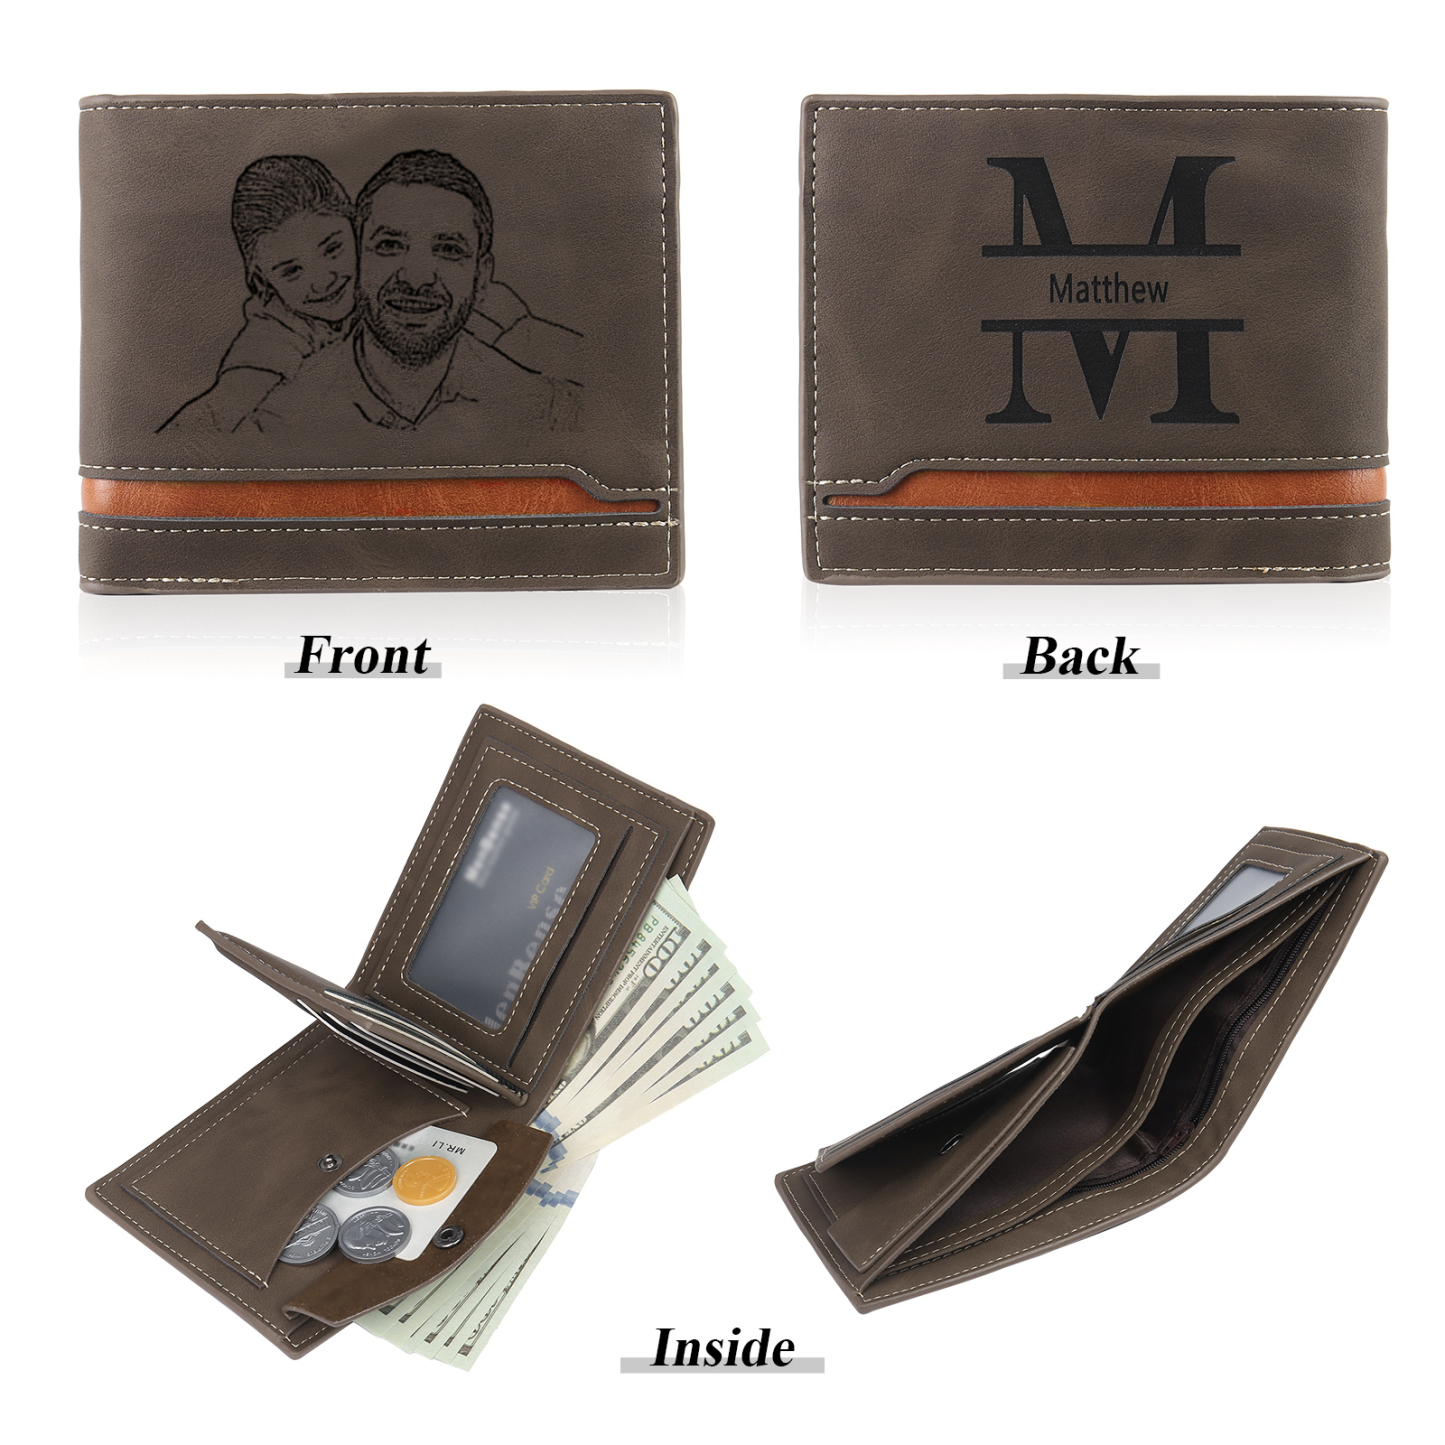 Personalized Leather Wallet Gift Box Set Keychain Strap Customizable 2 Photos 1 Letter and 1 Text Gift for Dad